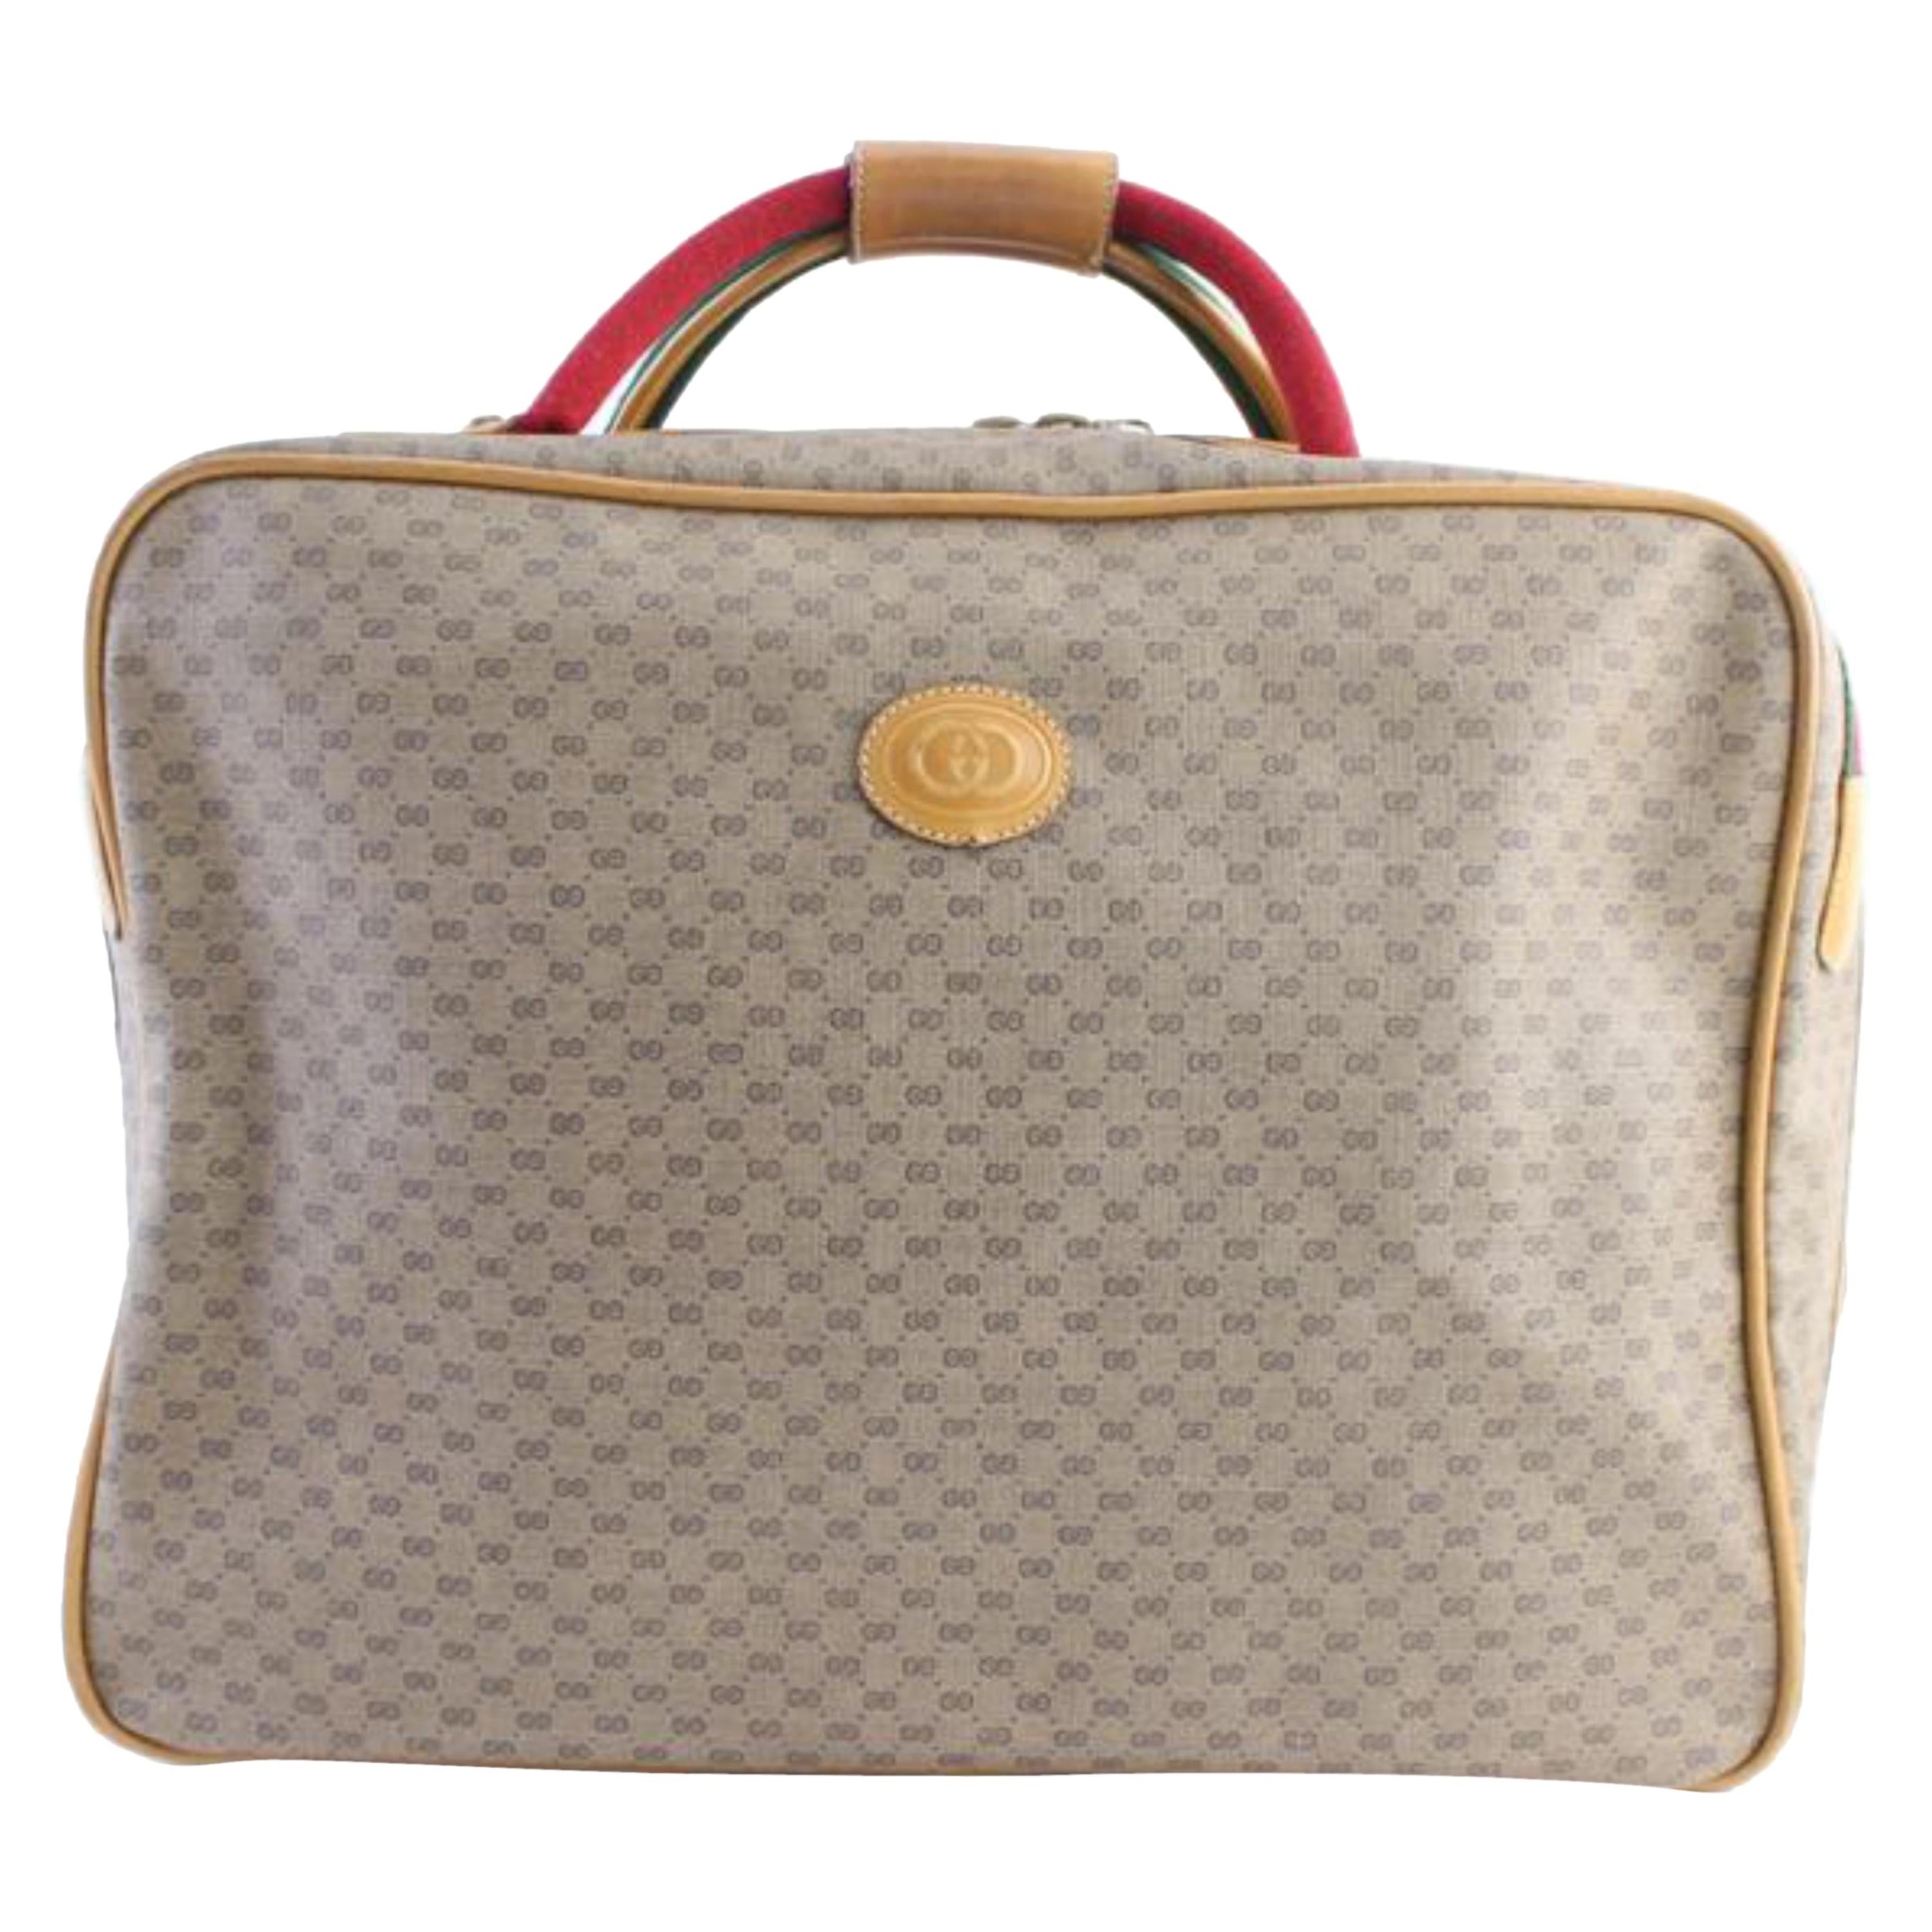 Gucci Duffle Web Monogram Suitcase 224269 Beige Leather Weekend/Travel Bag For Sale